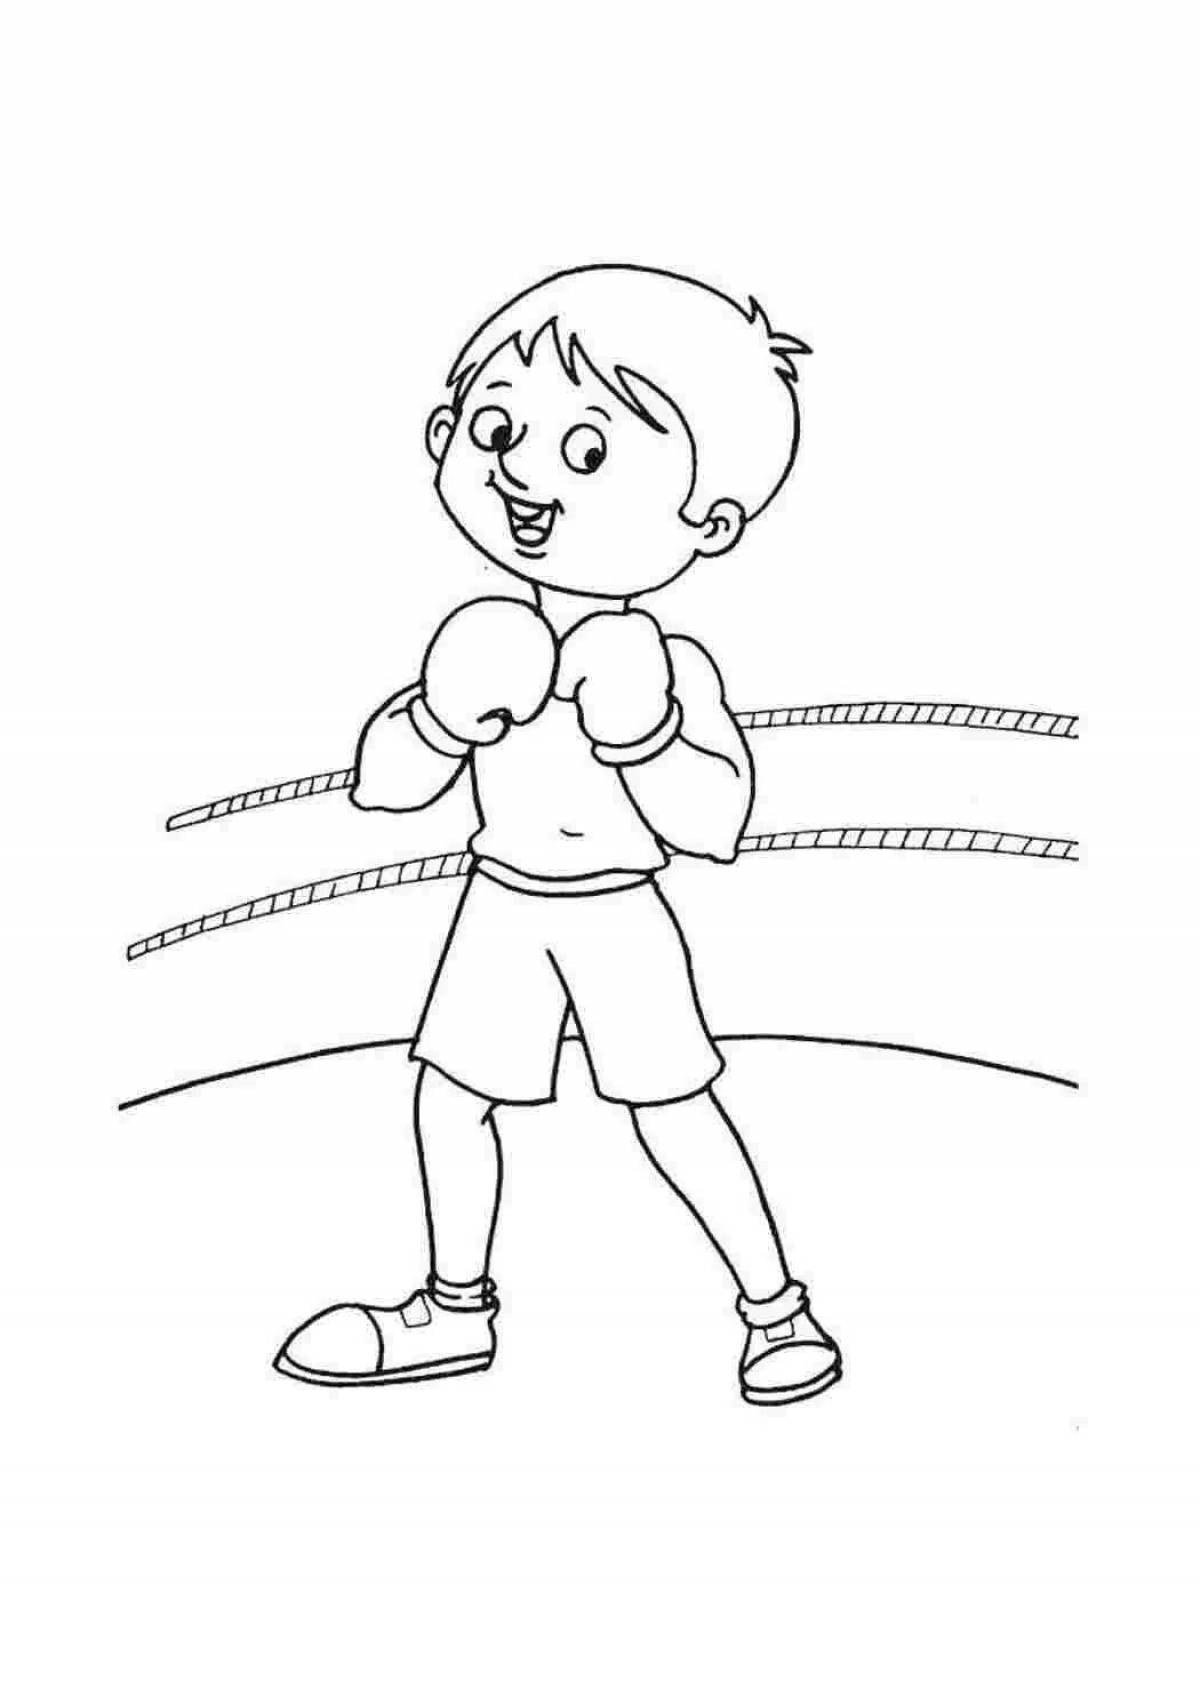 Cute boxing coloring book for kids